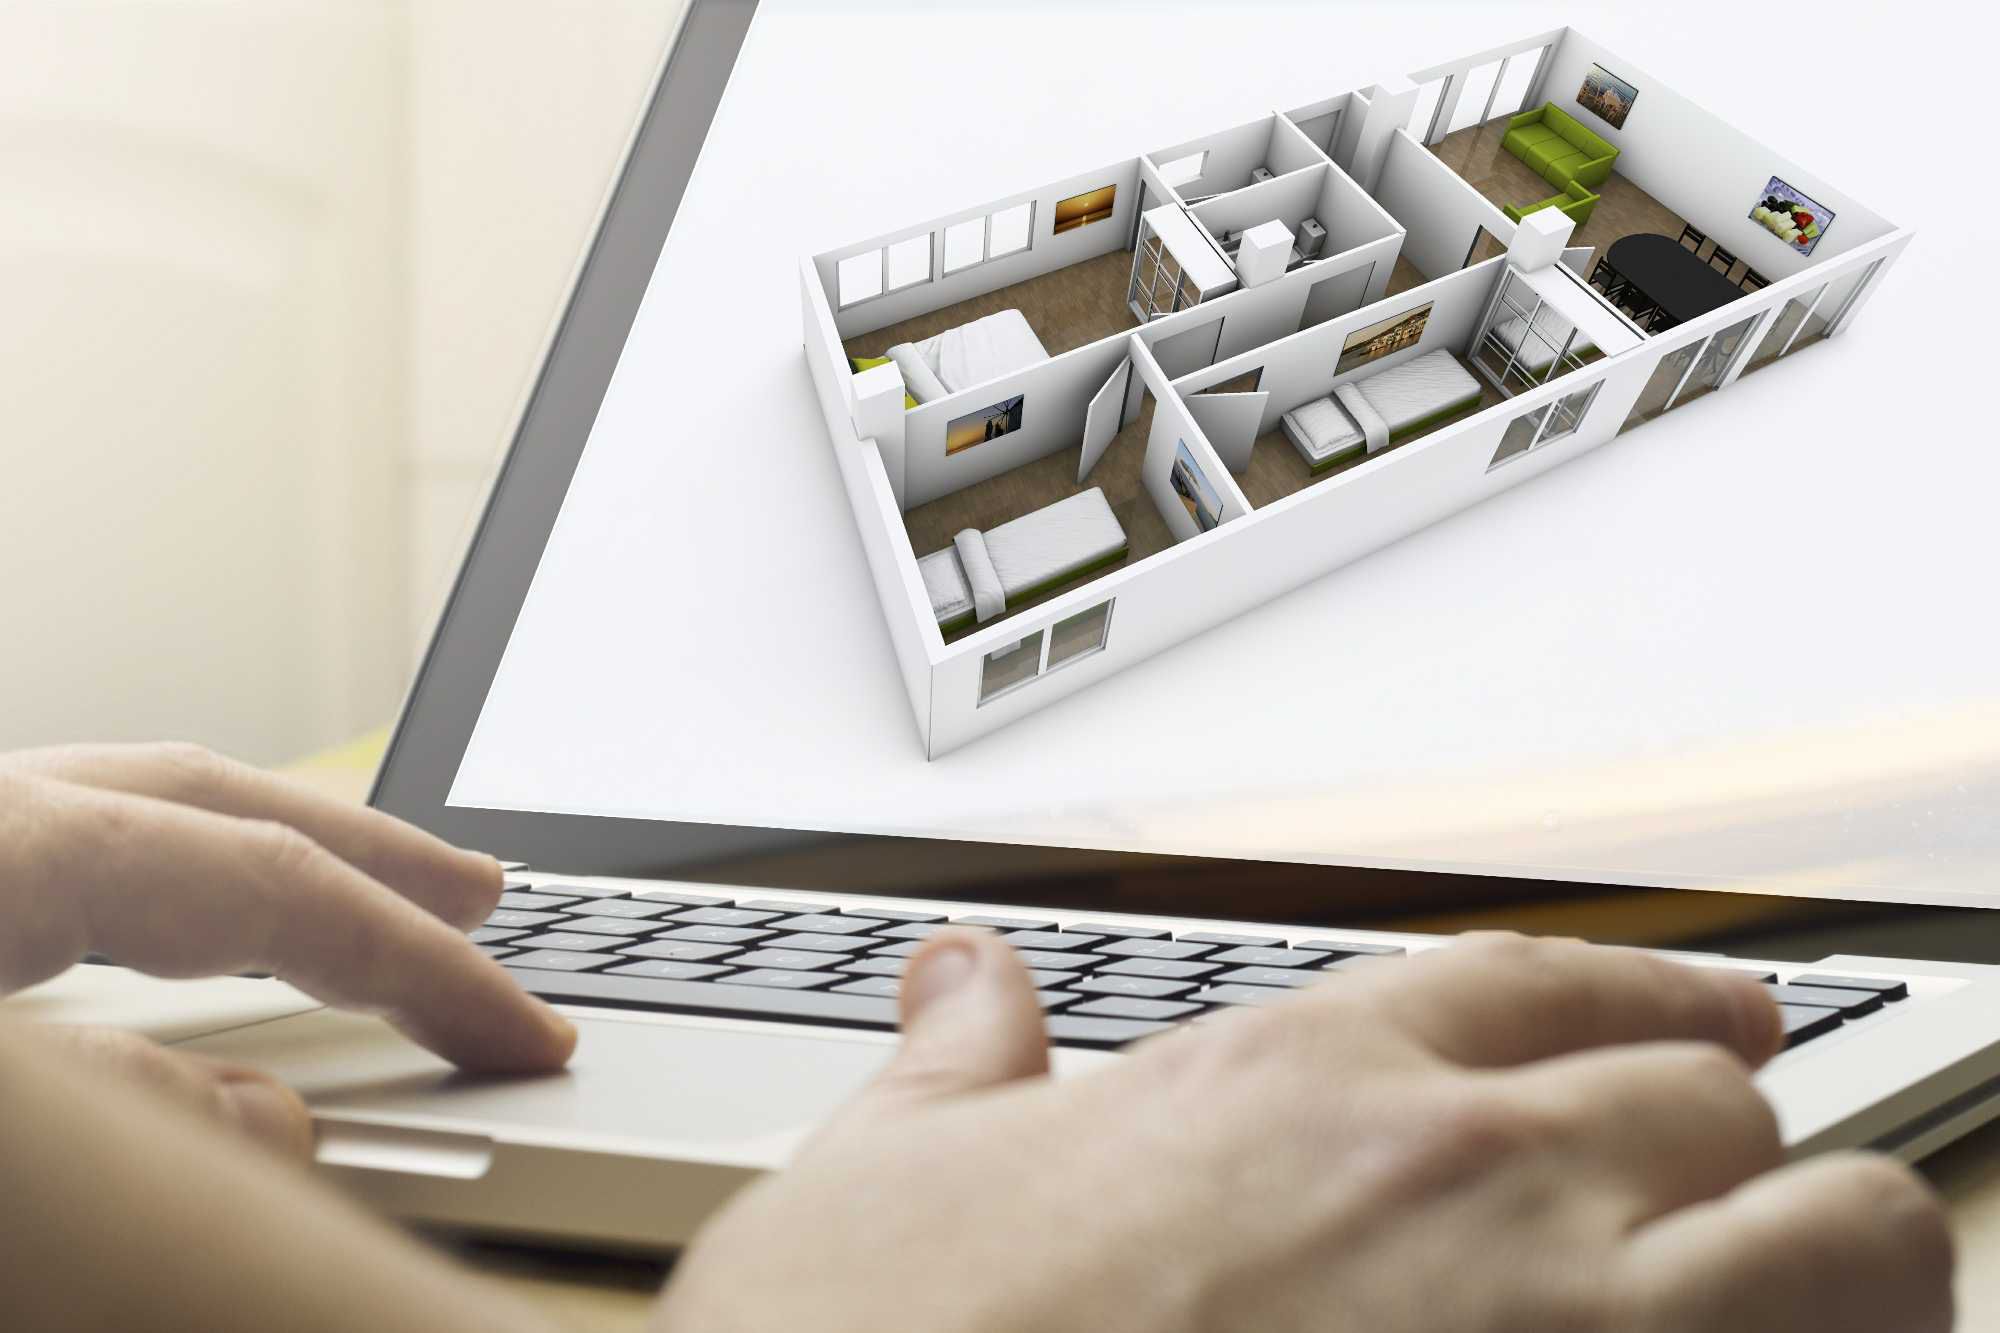 Picture of a 3 dimensional house on a computer screen with a mans hands typing on the keyboard